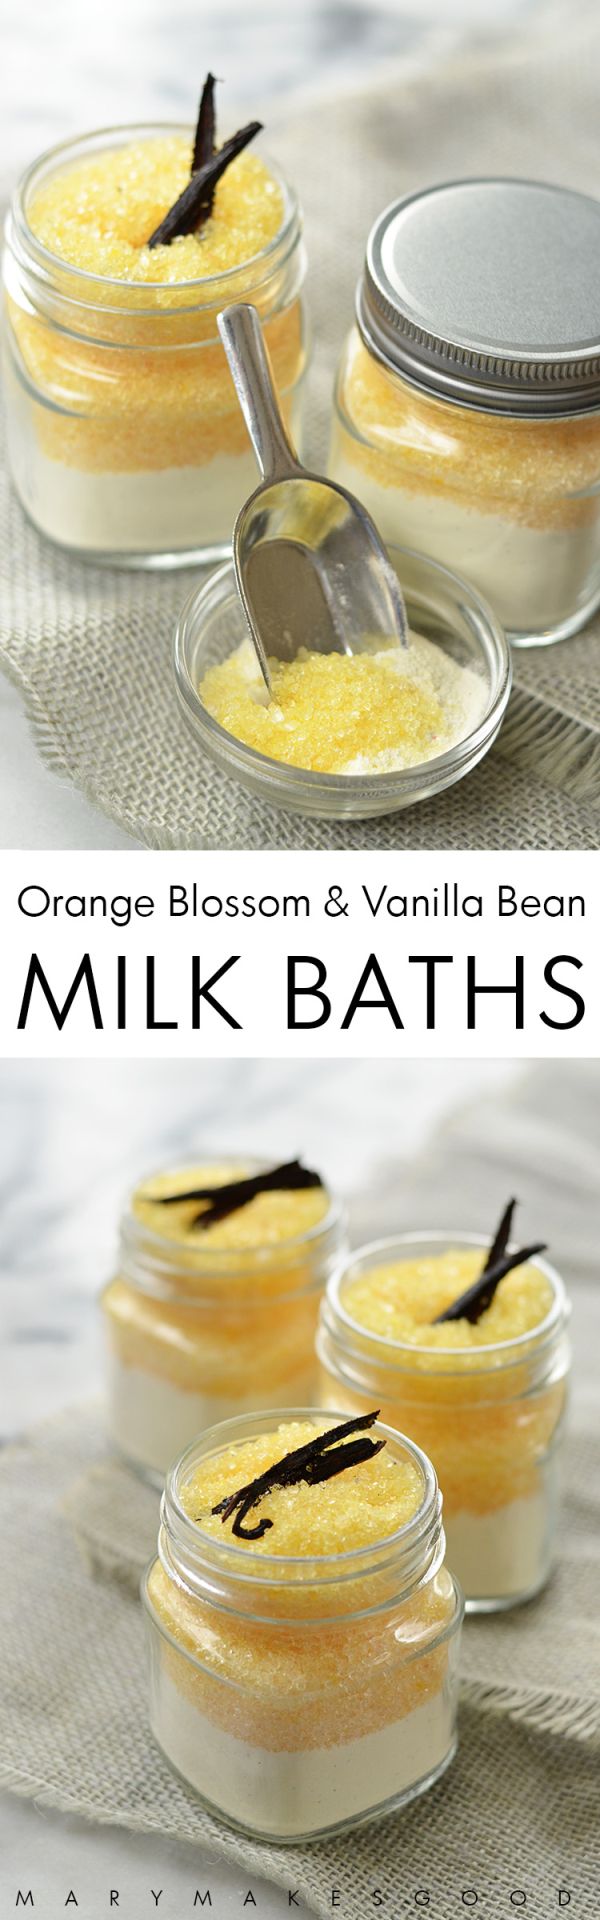 You can make these Orange Blossom & Vanilla Bean Milk Baths with just five all-n...